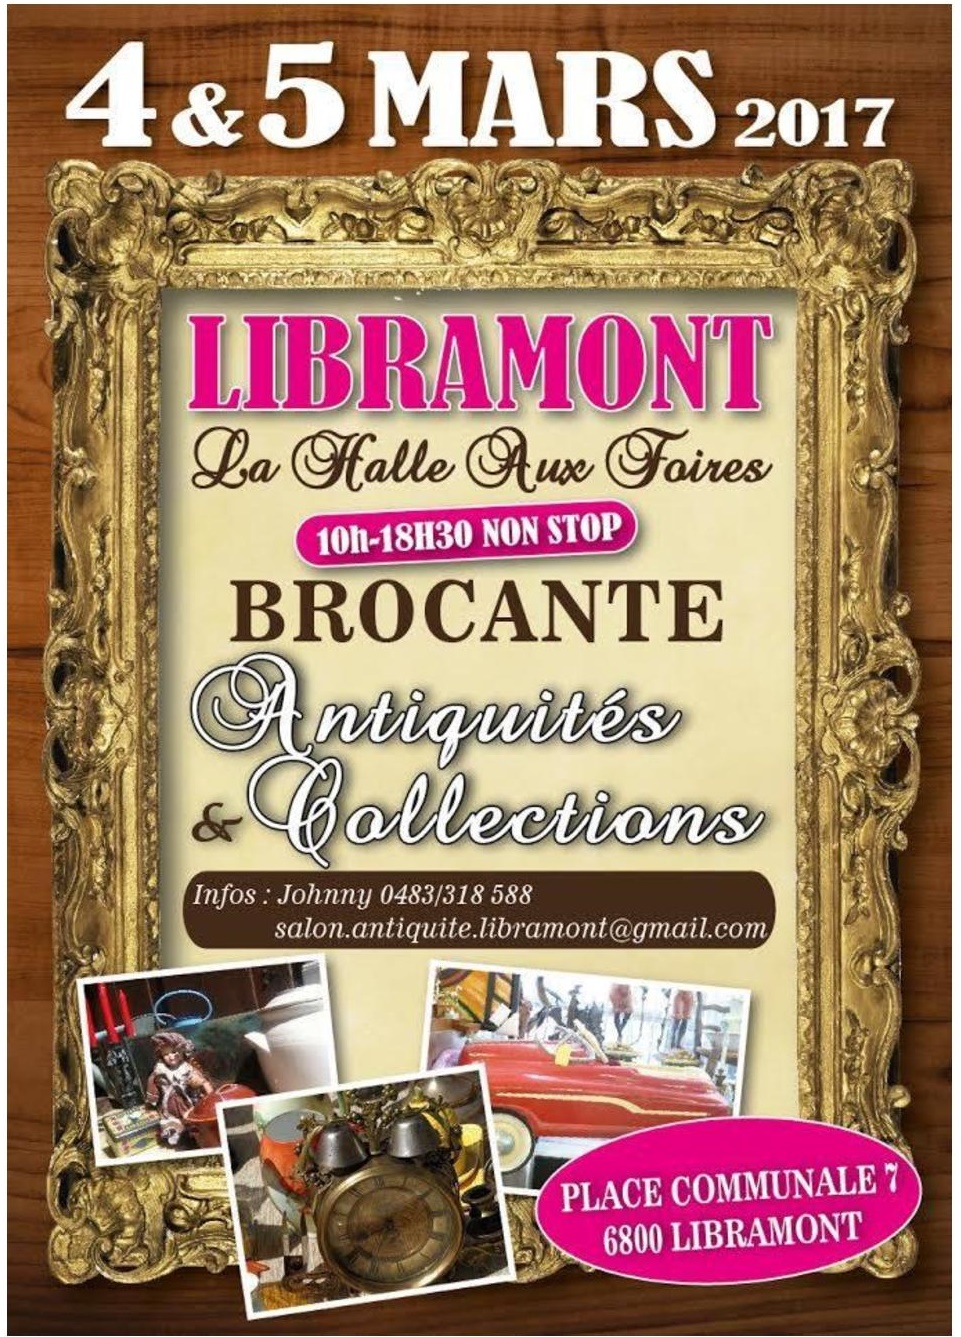 Libramont brocante page 001